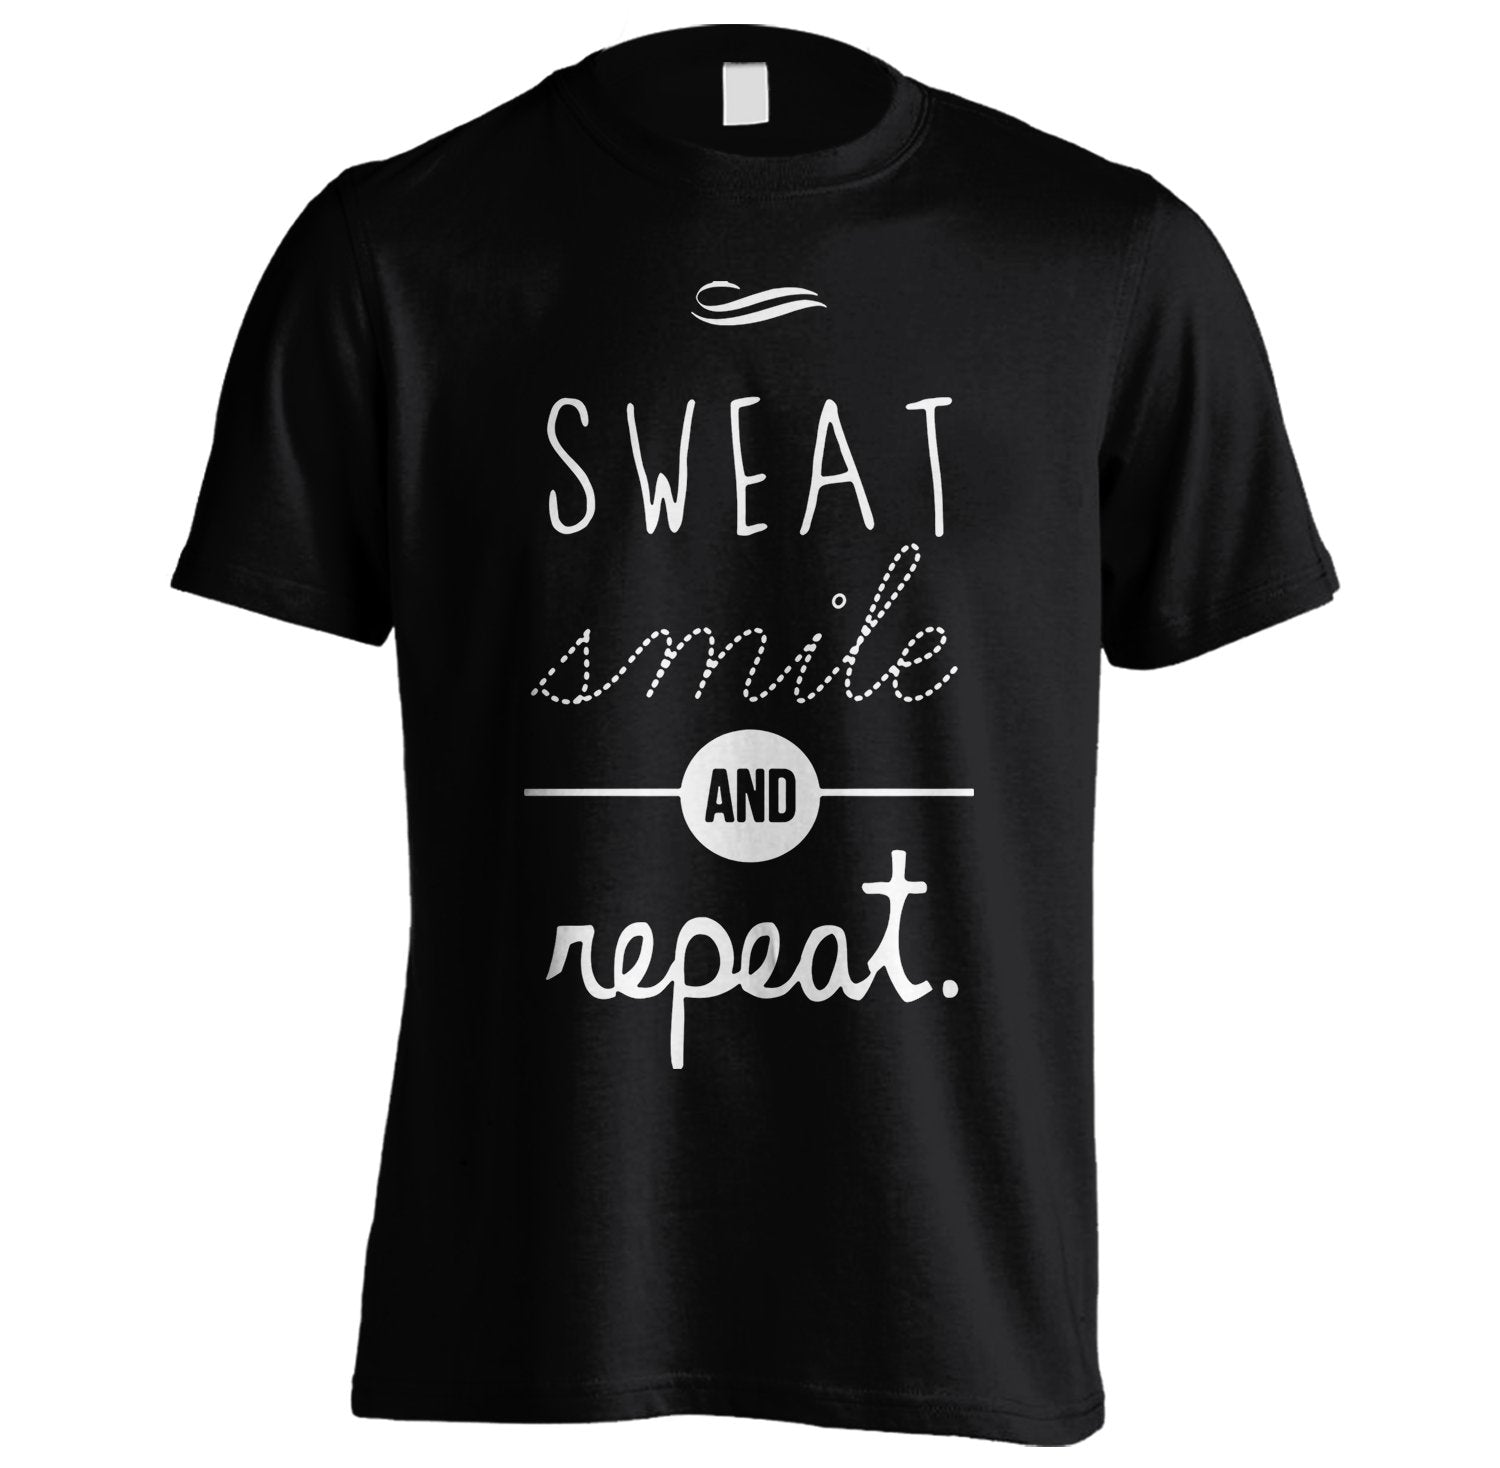 Sweat Smile Repeat Workout T-shirt - Happiness Idea